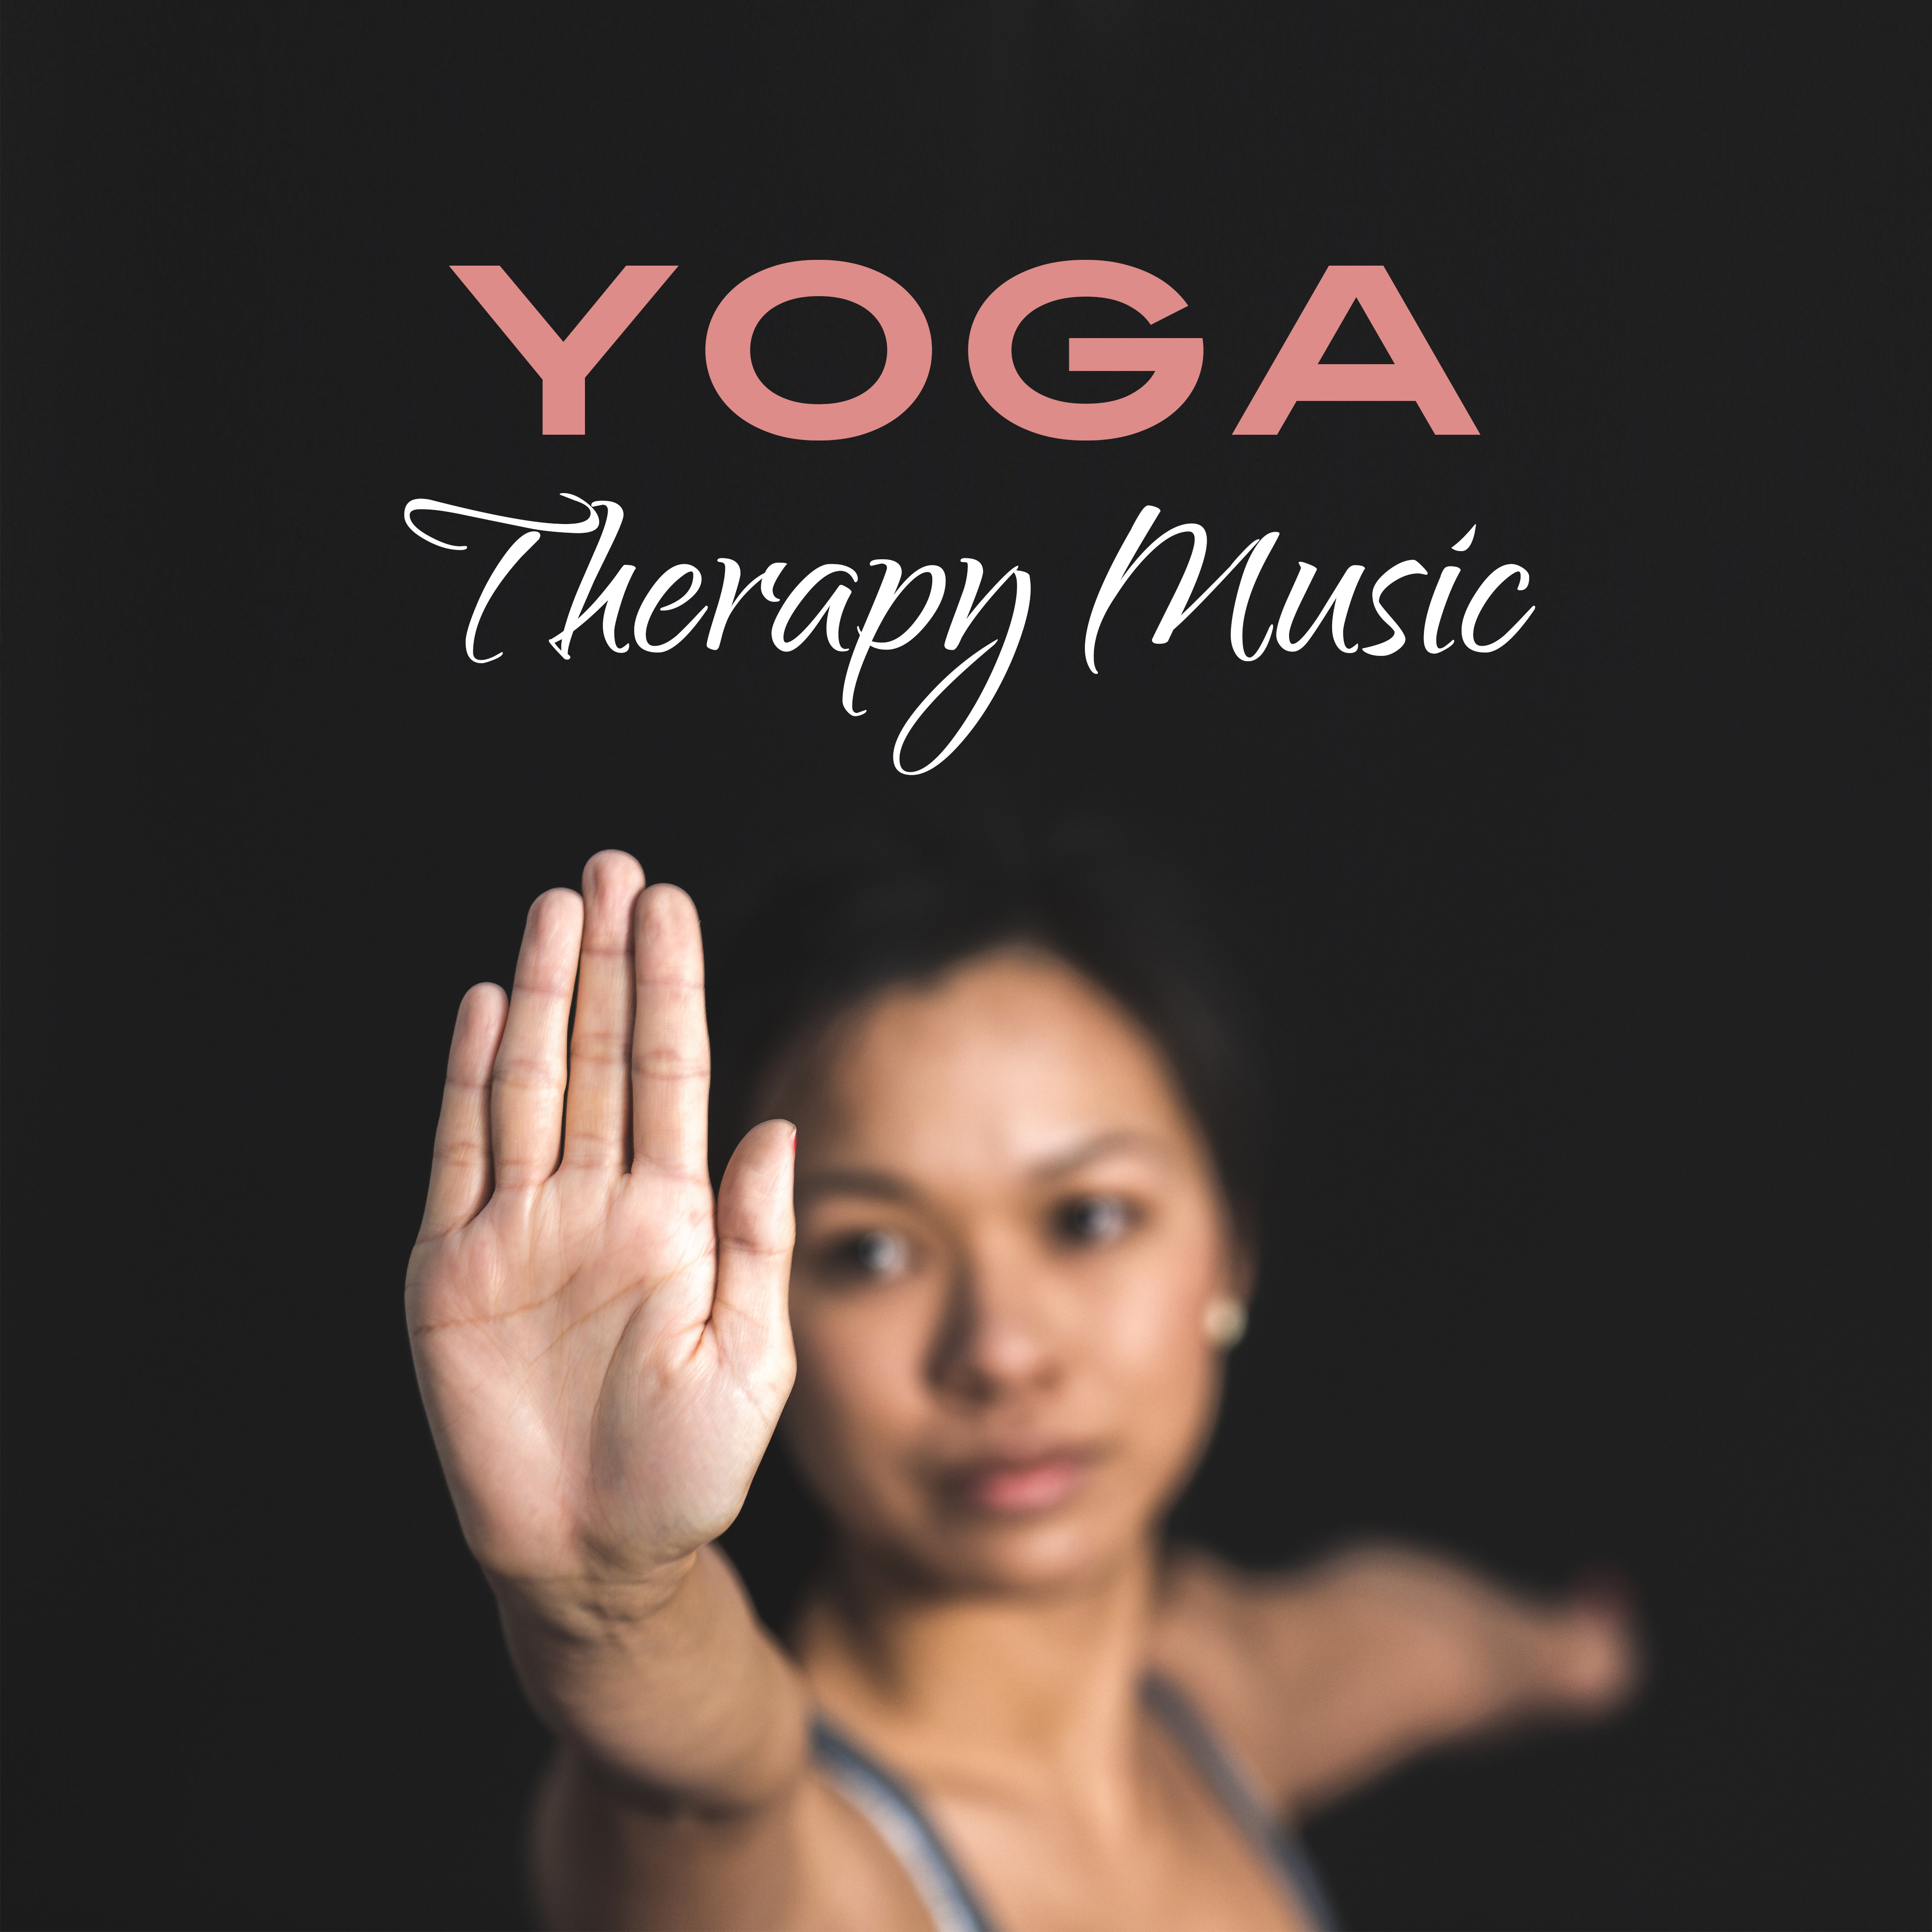 Yoga Therapy Music  Traditional New Age Music for Yoga Meditation, Zen, Healing Nature Sounds